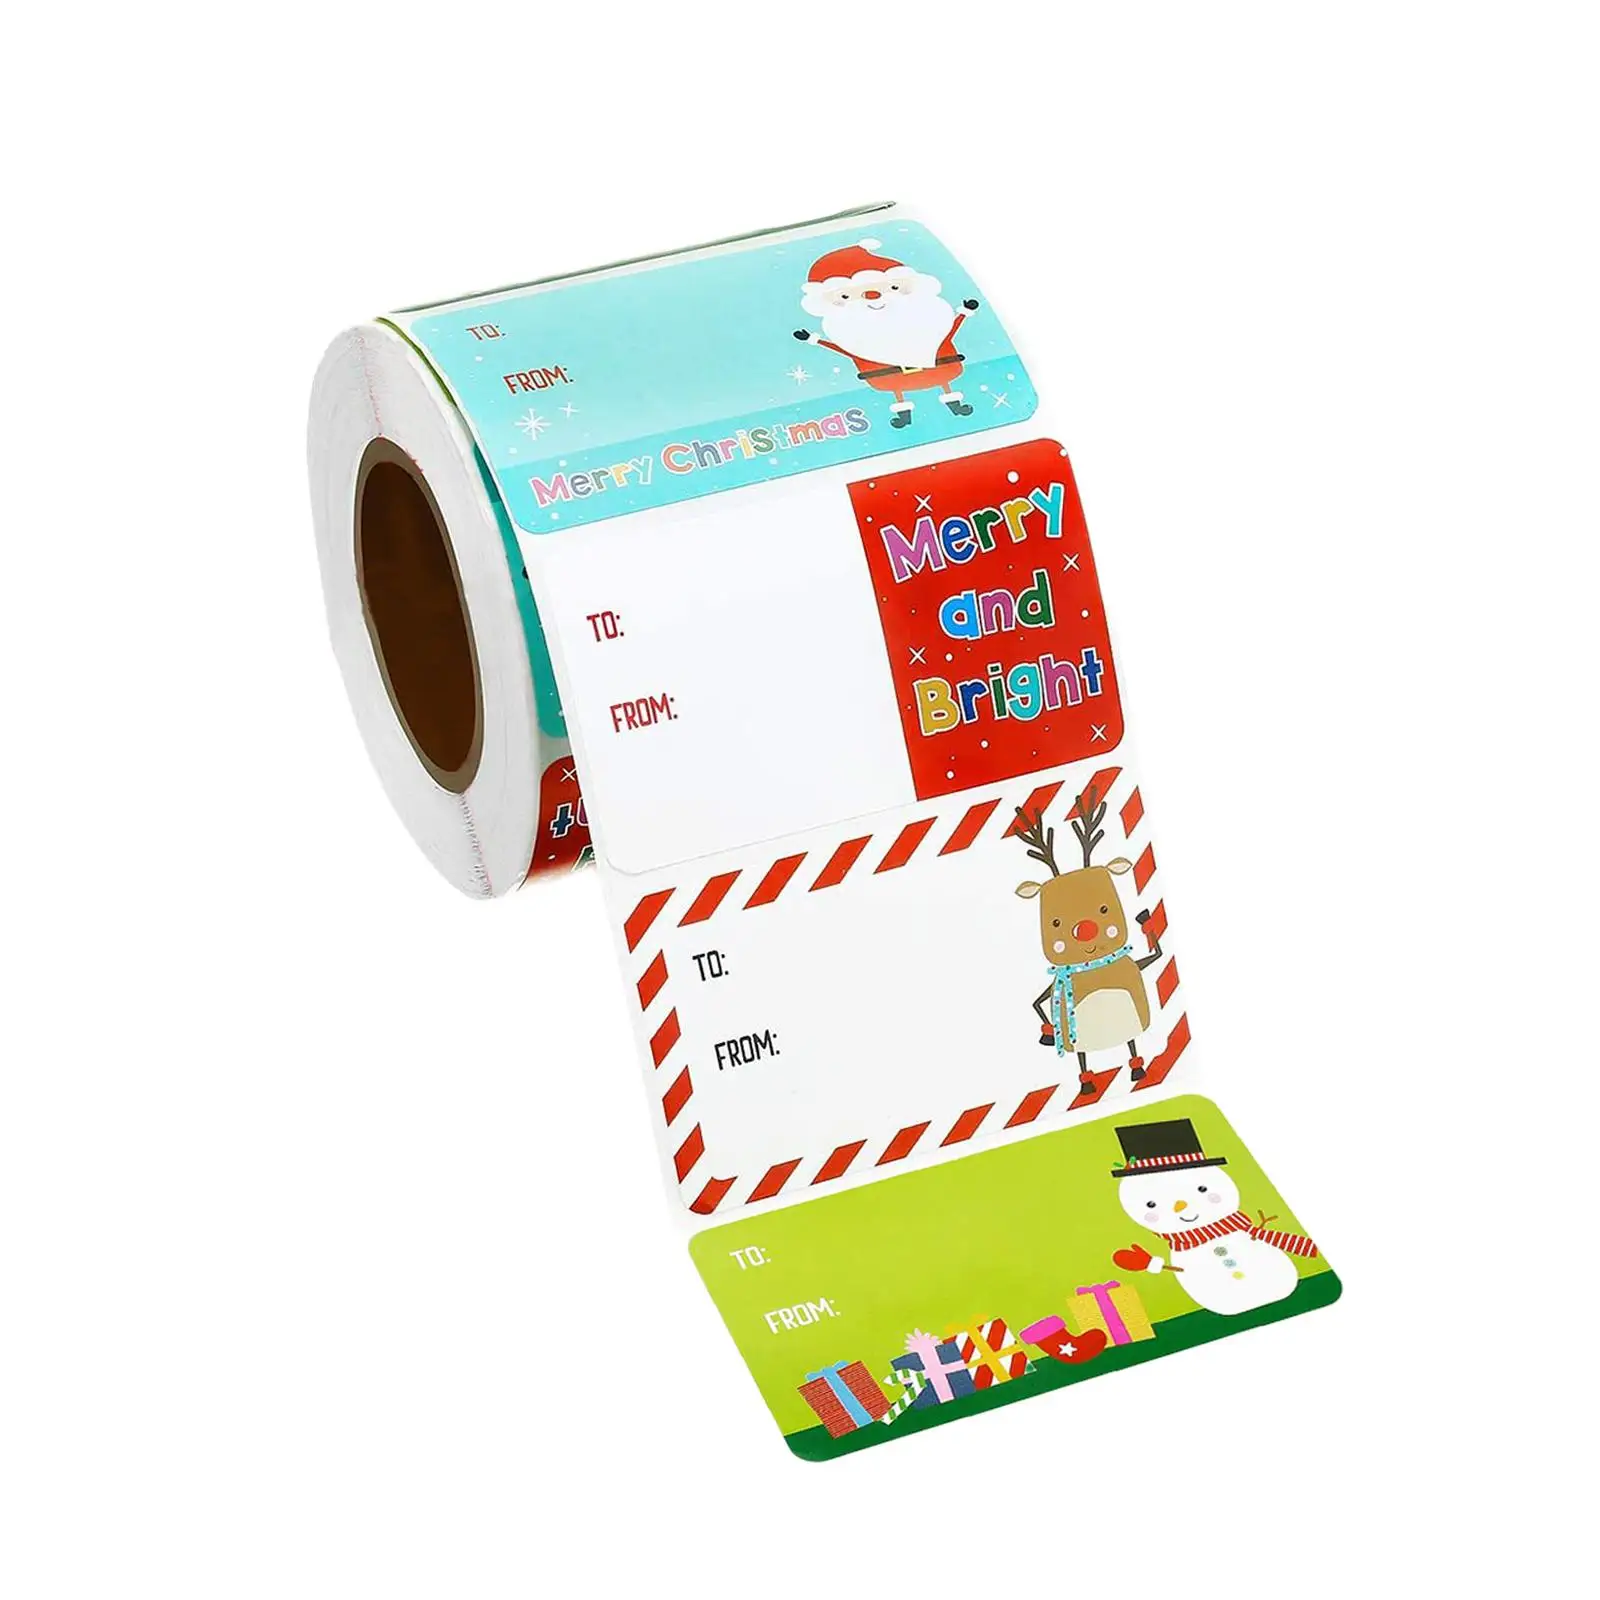 500x Xmas Stickers Christmas Name Stickers for Festival Invitations Holidays